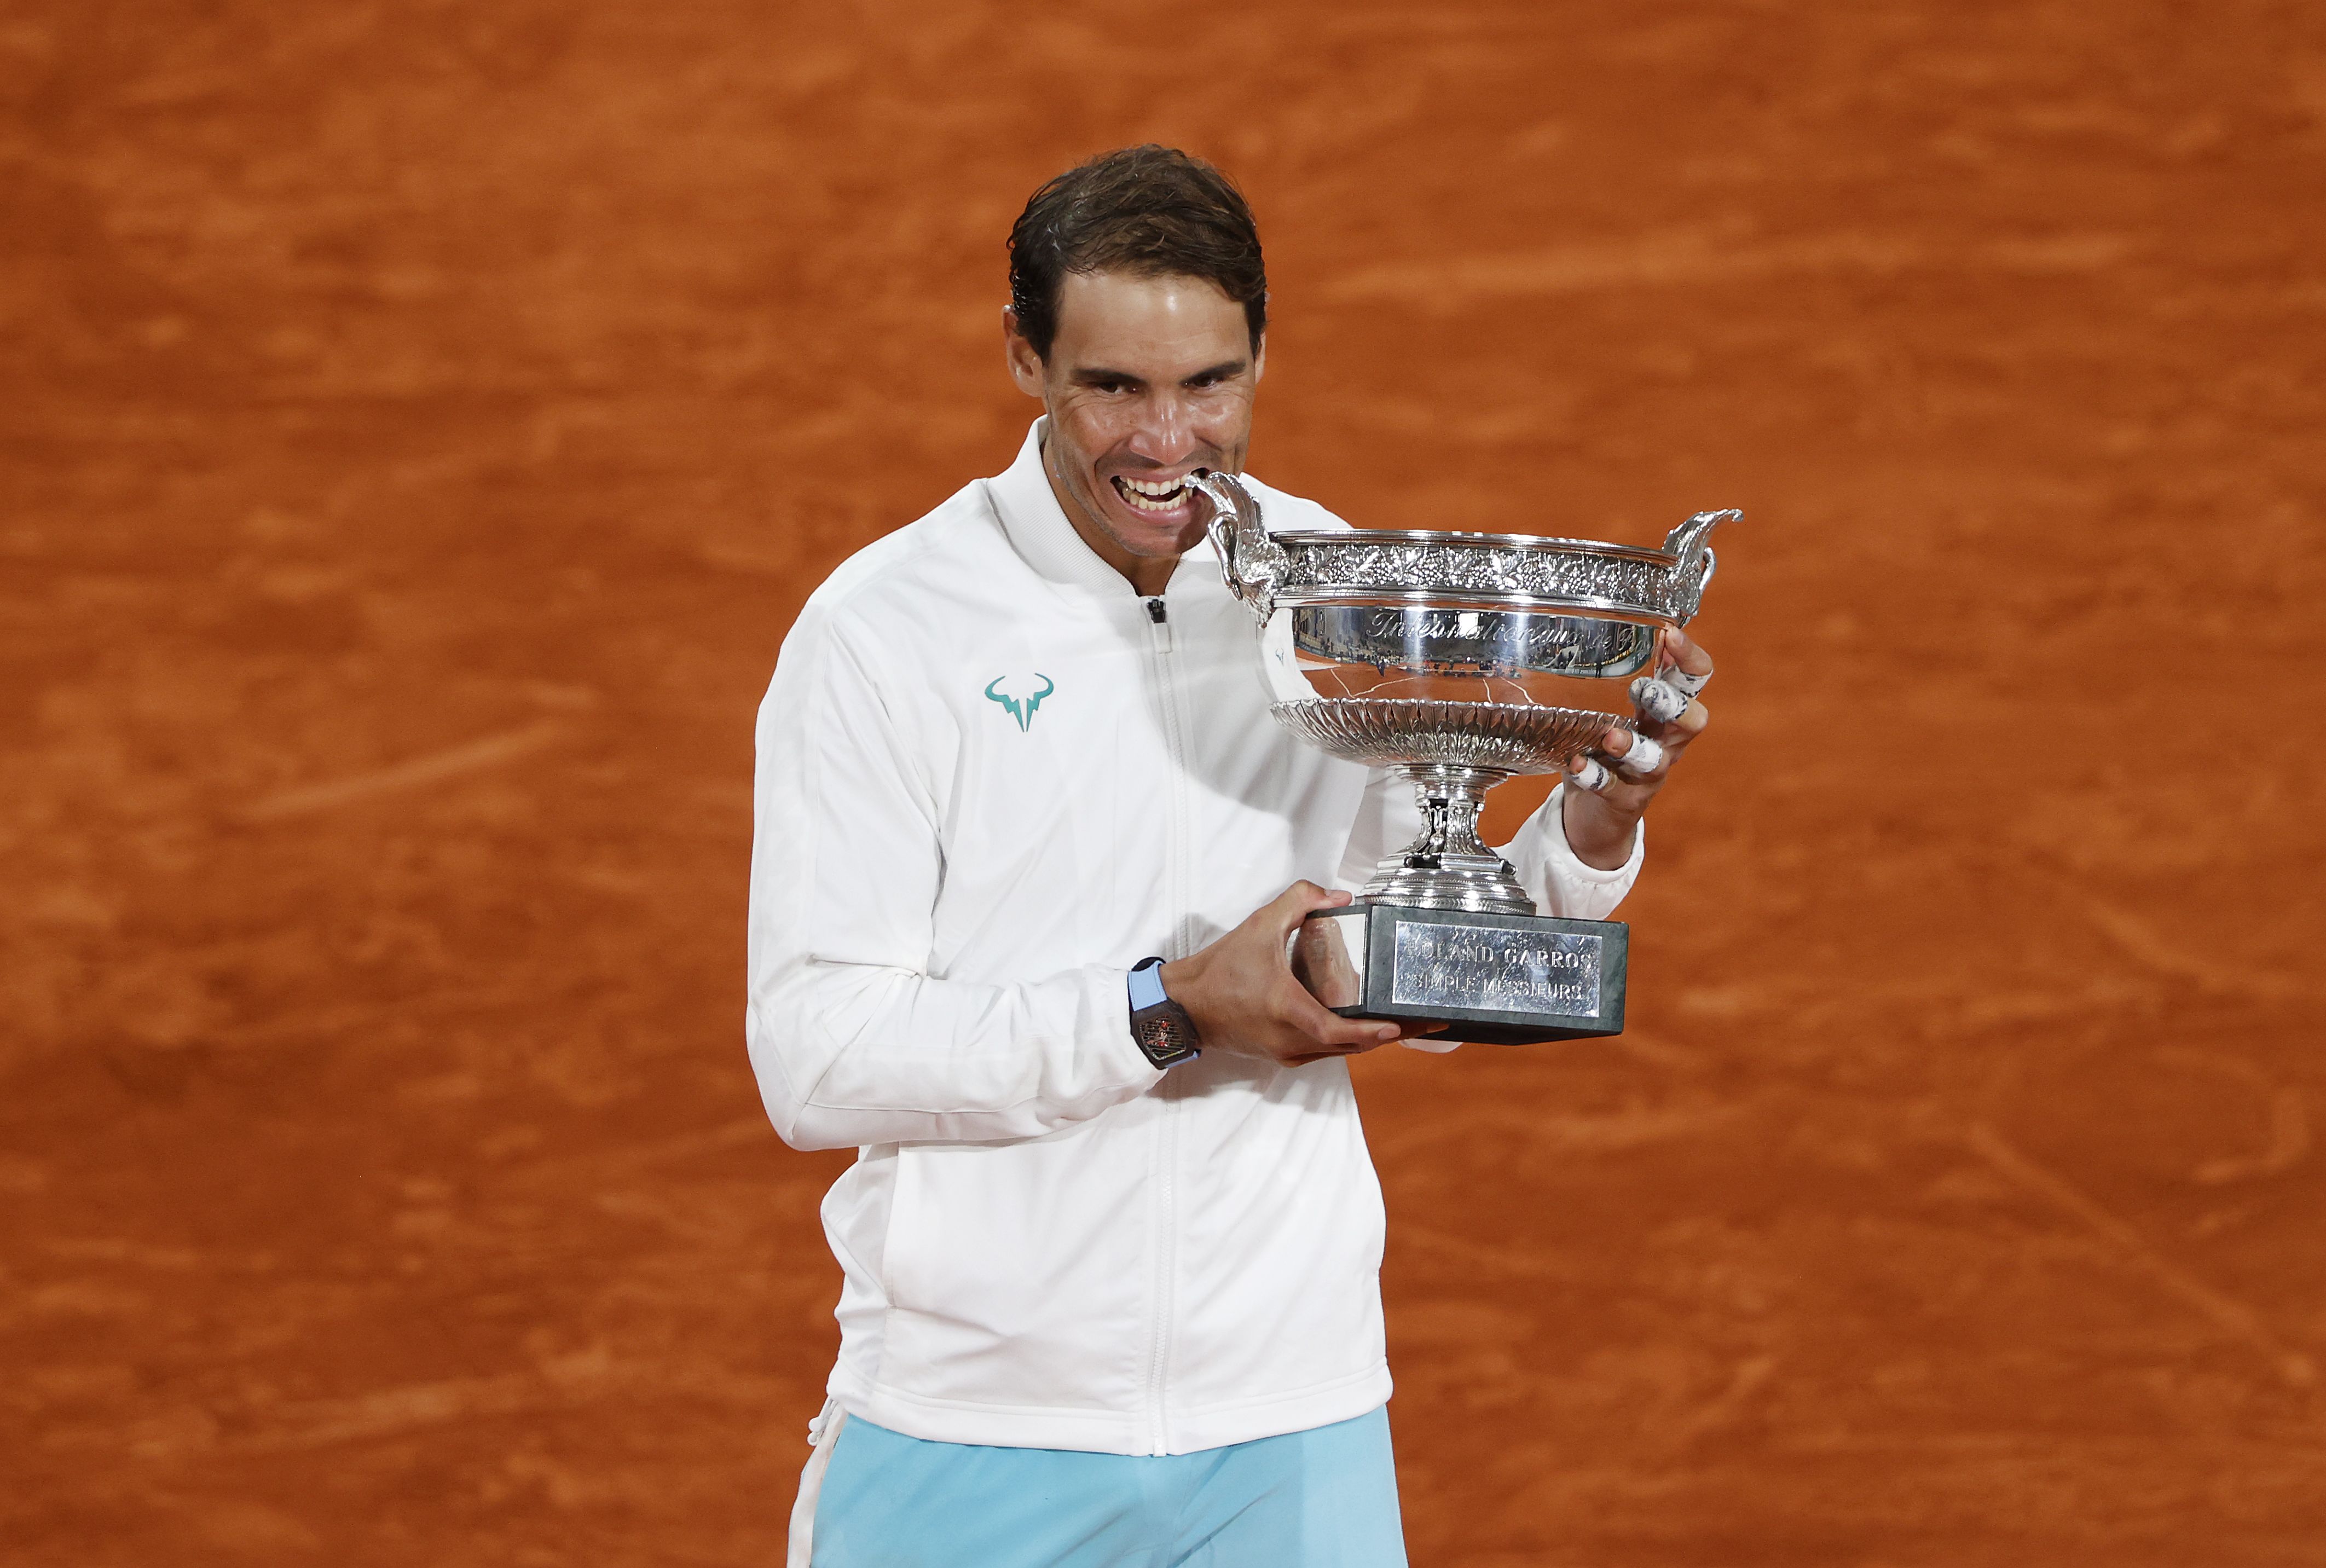 French Open 2020 draw: Rafael Nadal handed tough draw, Andy Murray